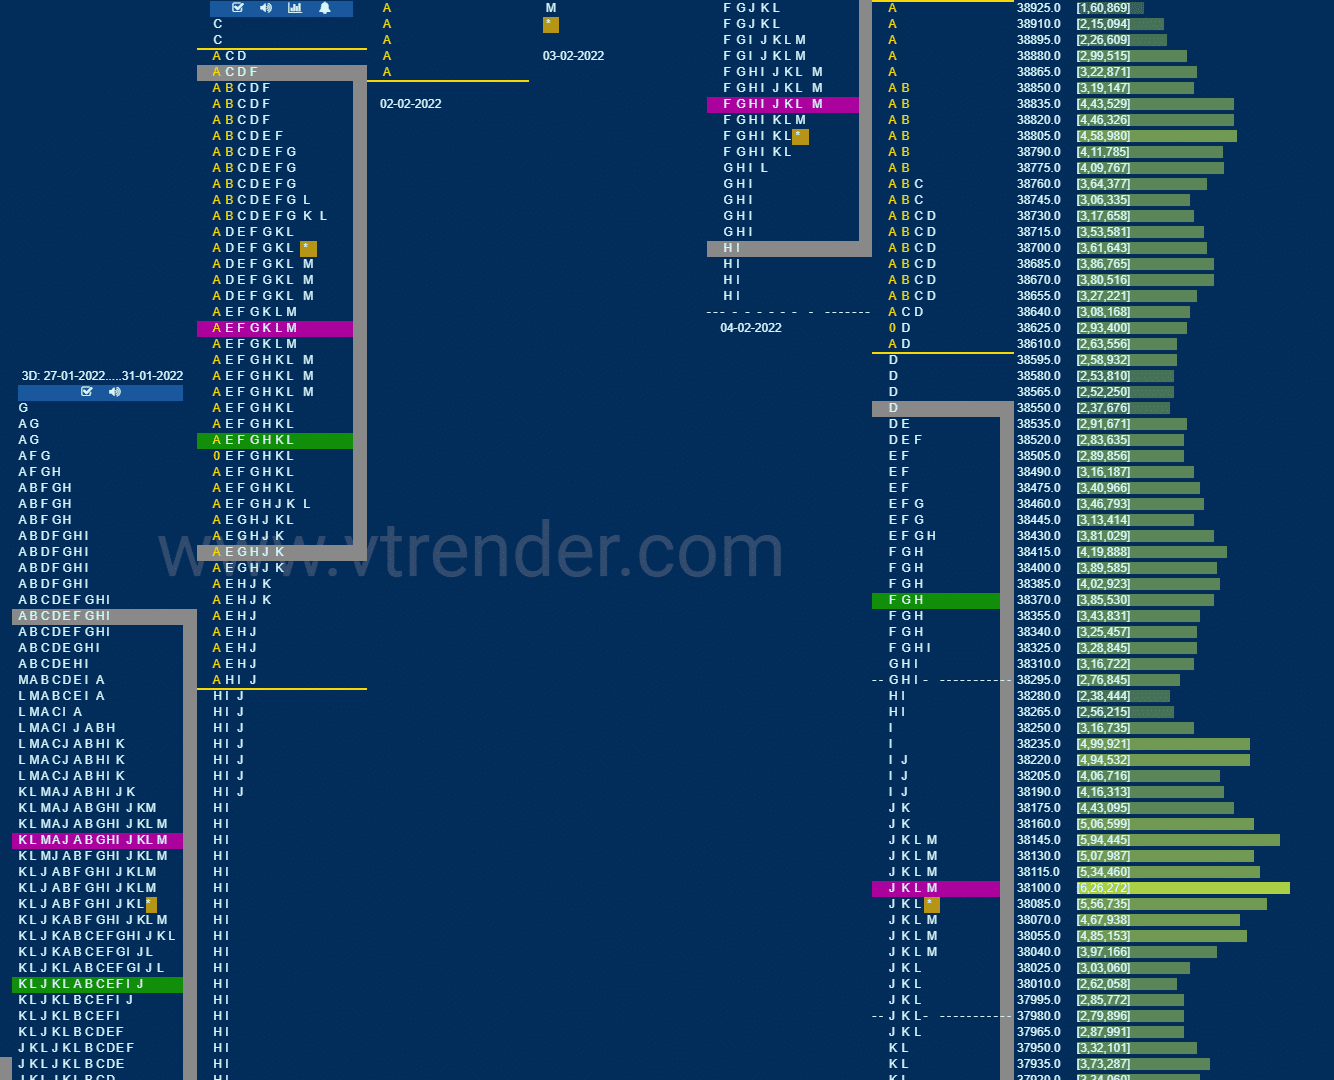 Bnf 4 Market Profile Analysis Dated 07Th February 2022 Banknifty Futures, Charts, Day Trading, Intraday Trading, Intraday Trading Strategies, Market Profile, Market Profile Trading Strategies, Nifty Futures, Order Flow Analysis, Support And Resistance, Technical Analysis, Trading Strategies, Volume Profile Trading